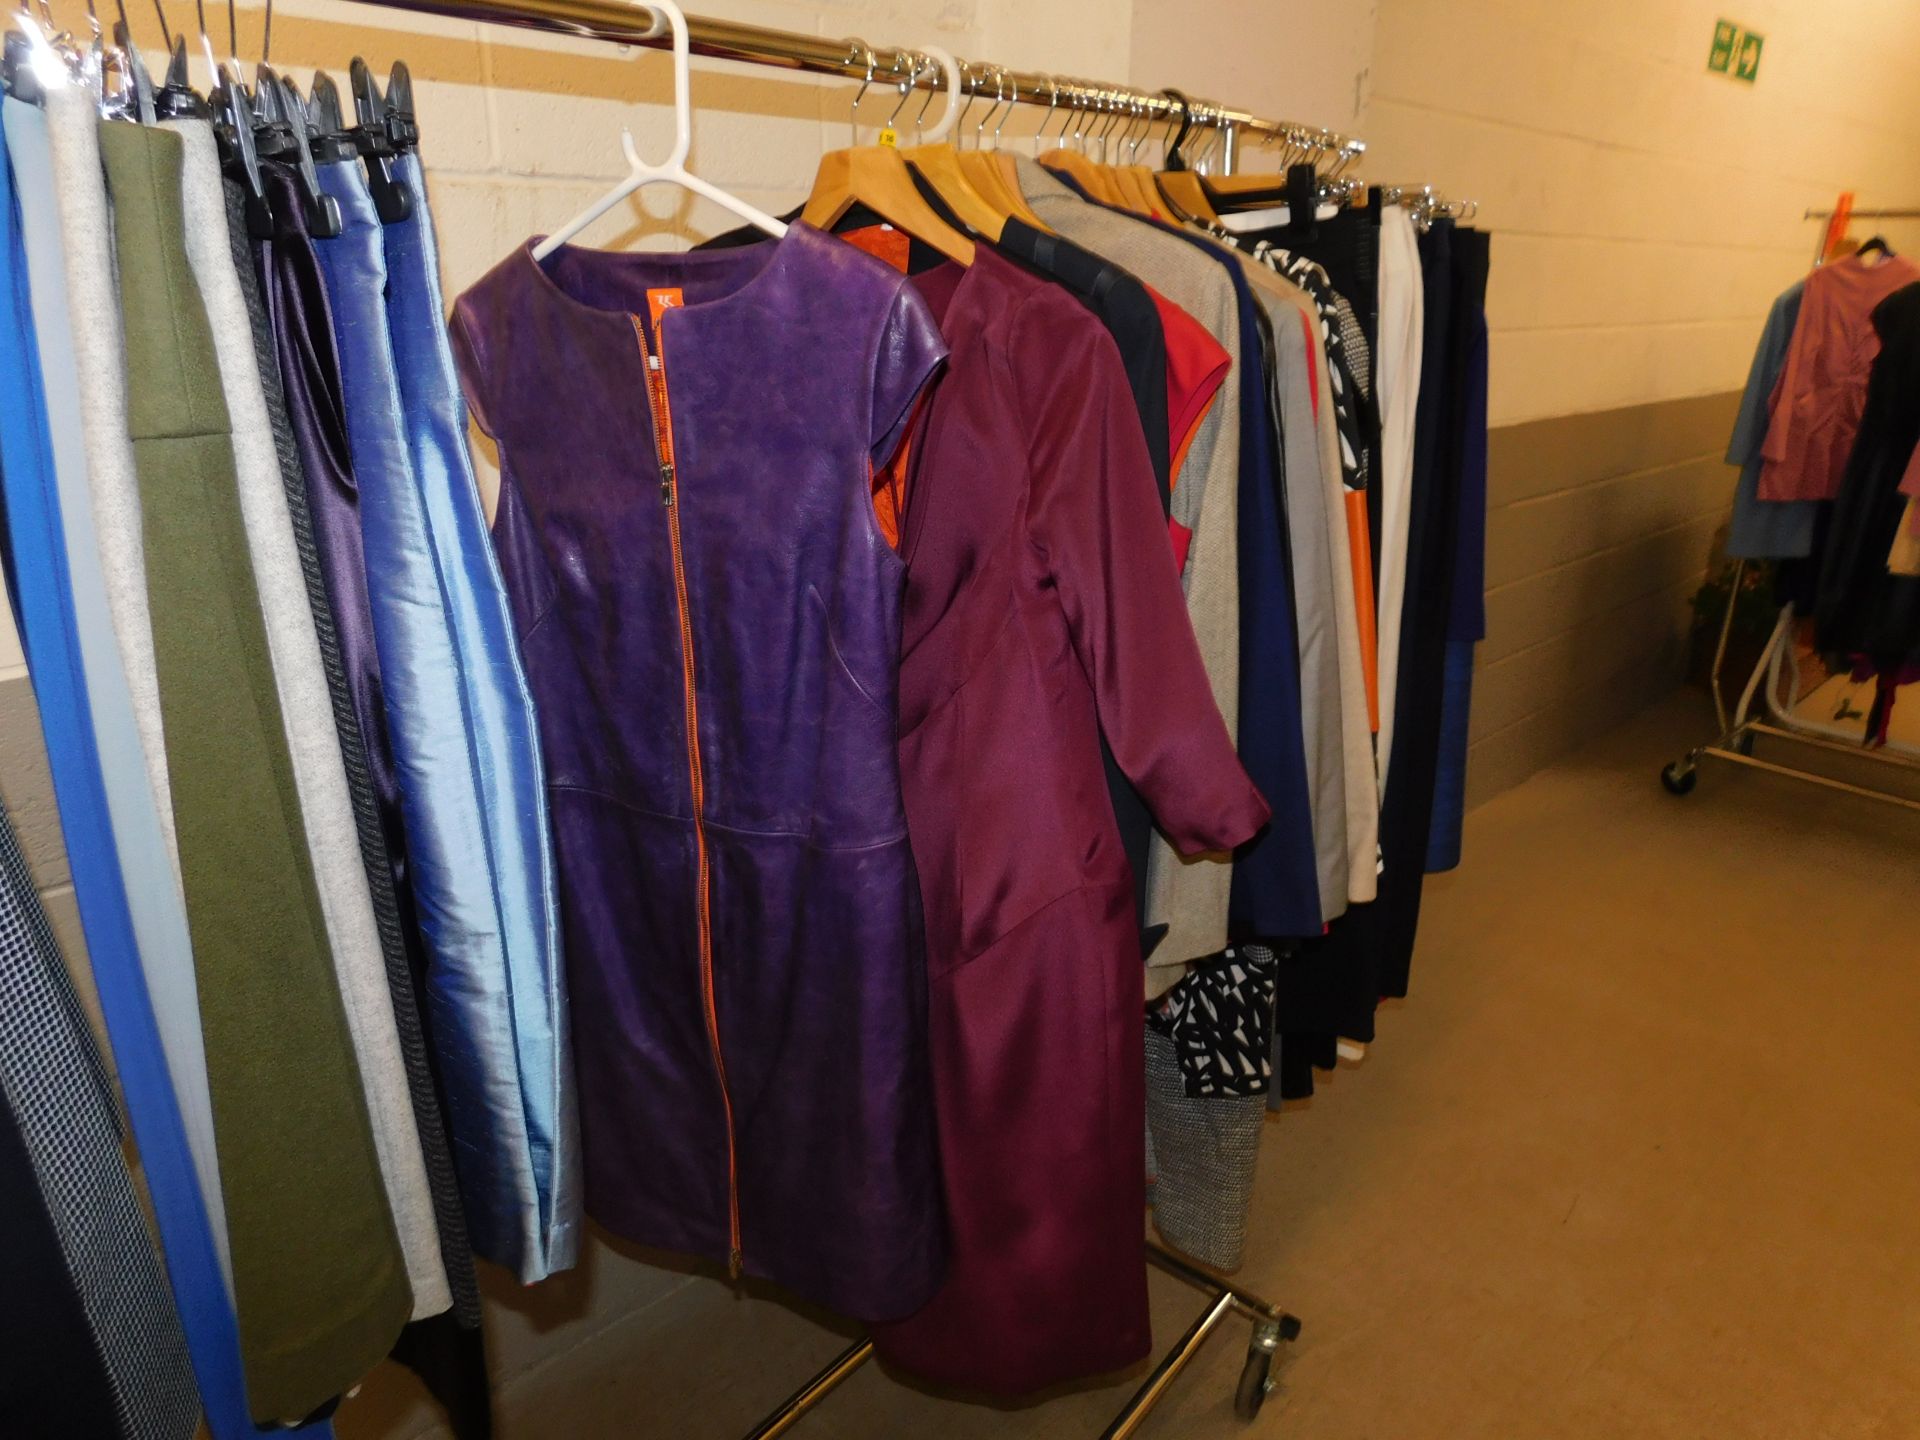 Contents of Rail of "Number 35" Ladies Business Wear, Size 10 (21 Skirts, 9 Tops/Dresses,  11 Jacket - Image 3 of 7